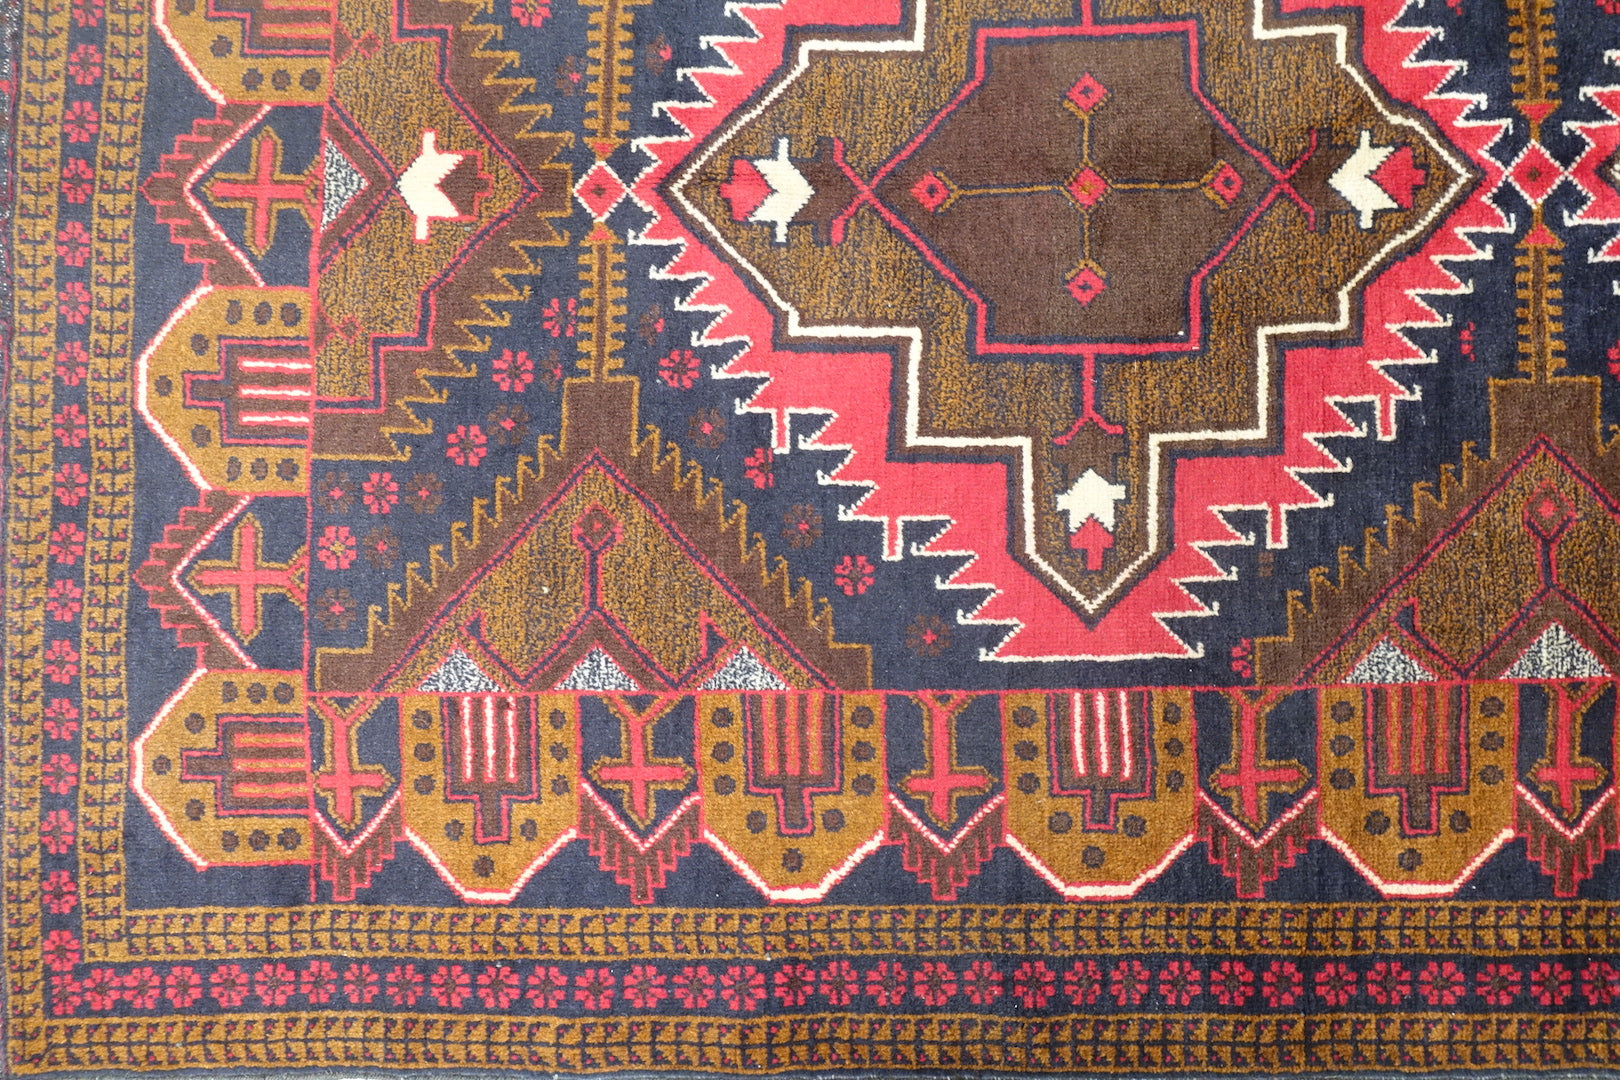 A 4 feet by 7.5 feet Balochi wool rug, the colours used are red, orange and blue.